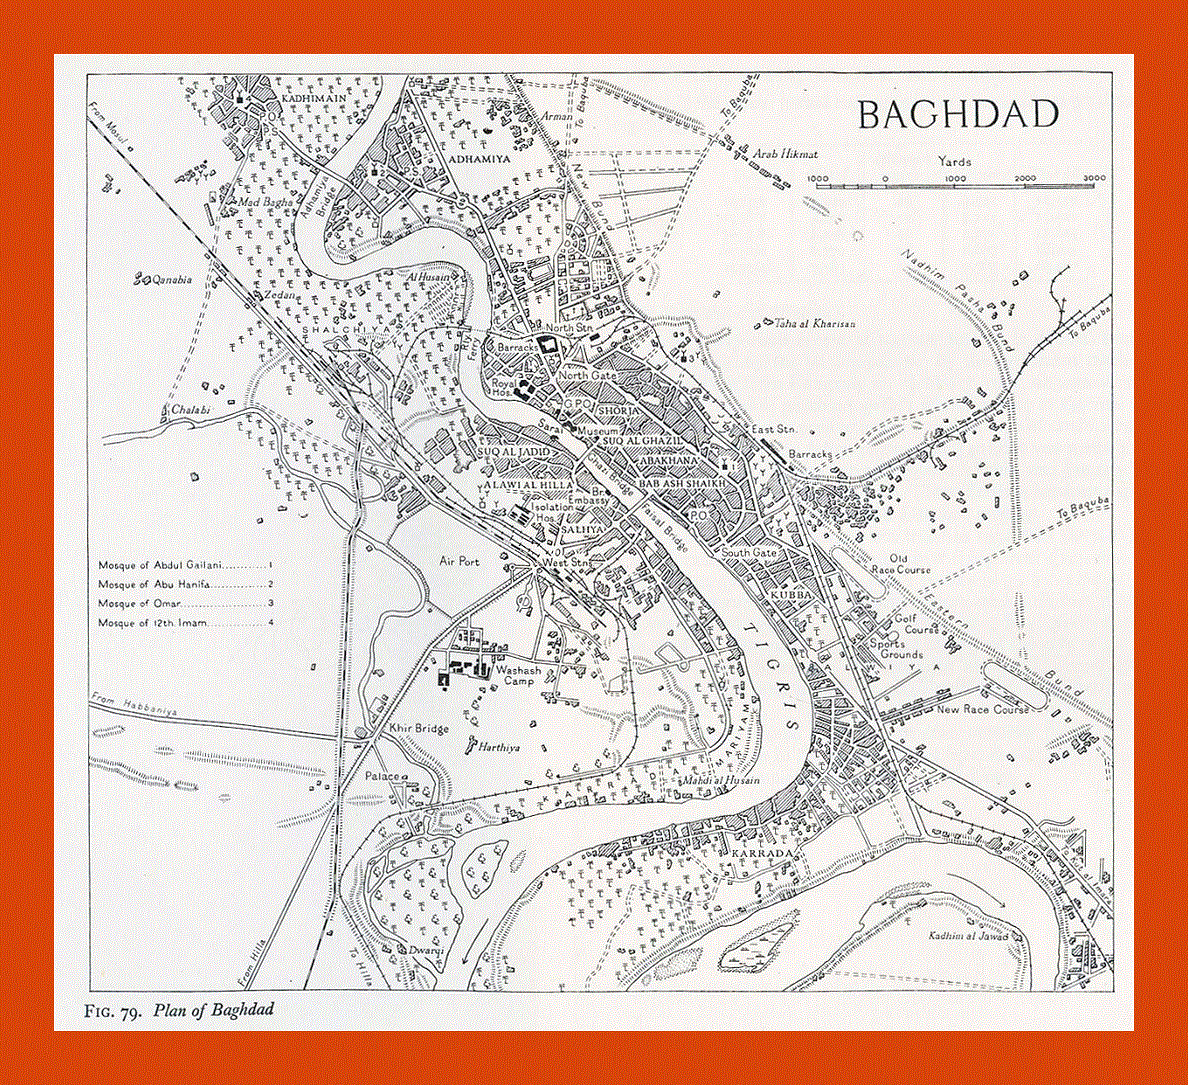 Old map of Baghdad city - 1944